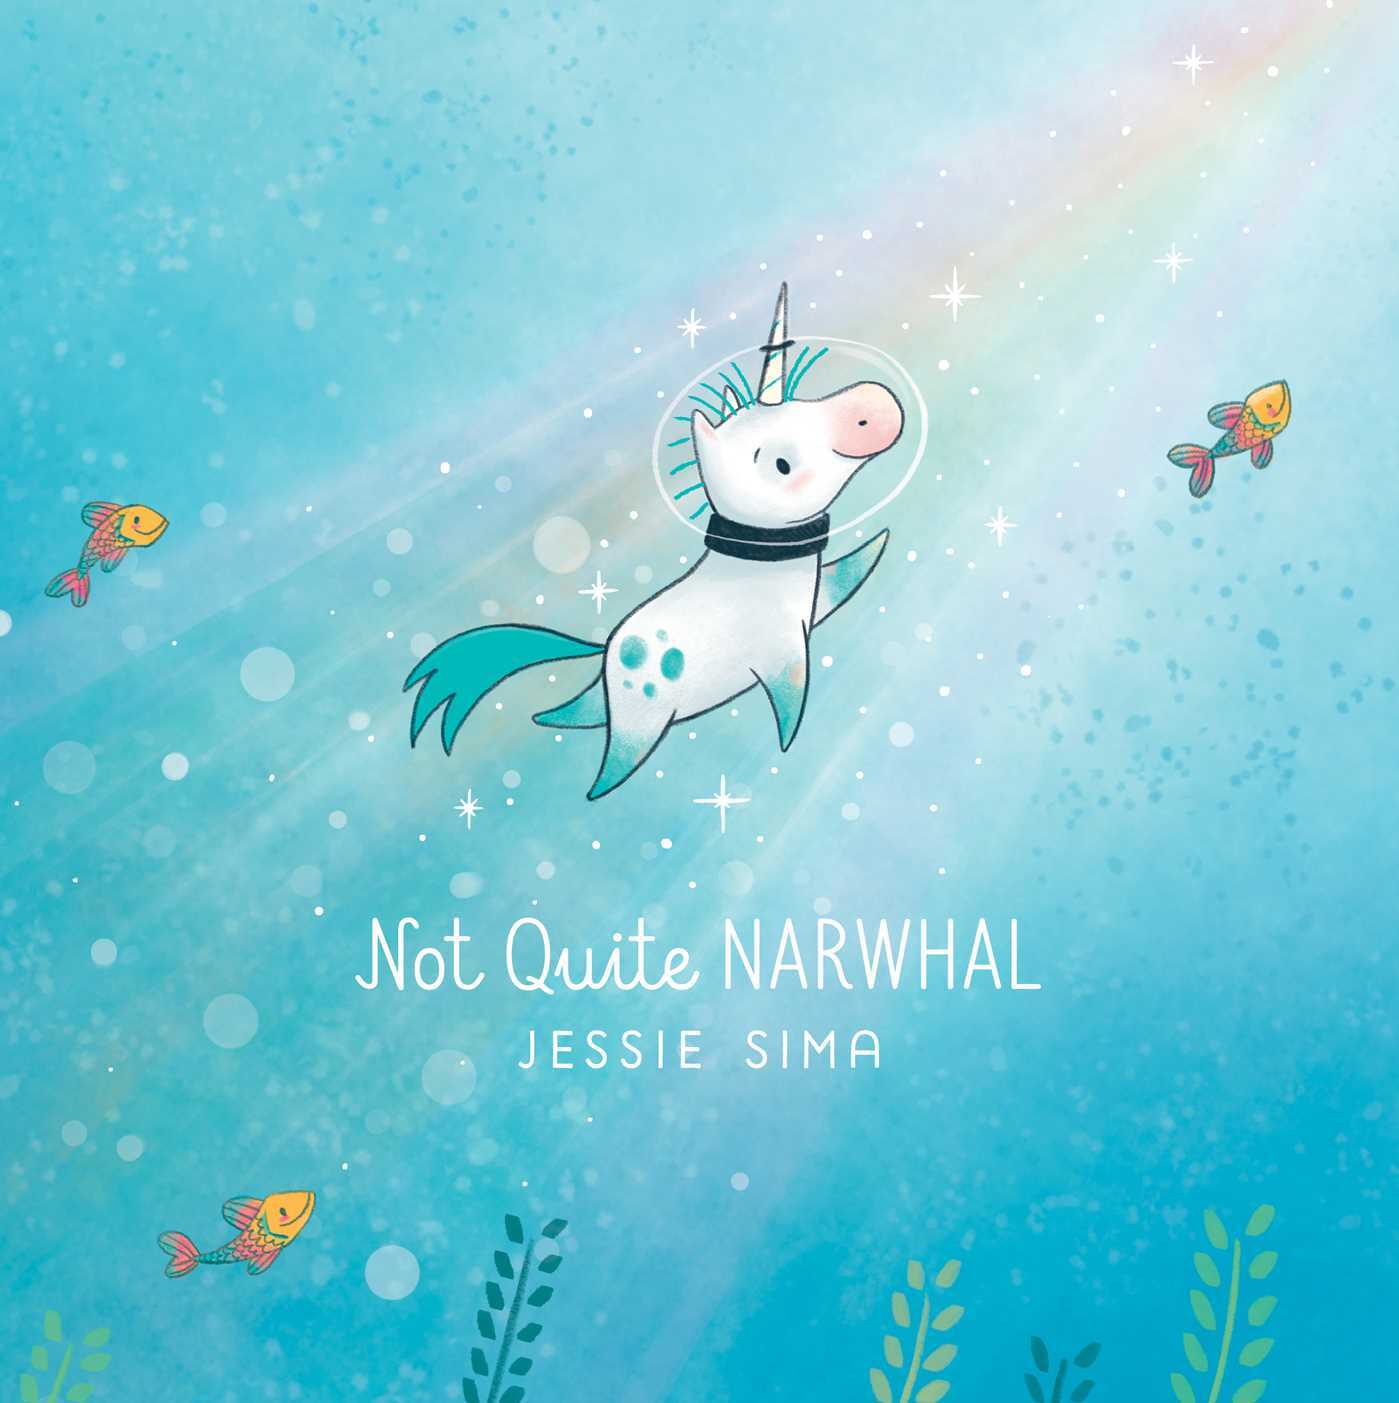 Cover of Not Quite Narwhal by Jessie Sima